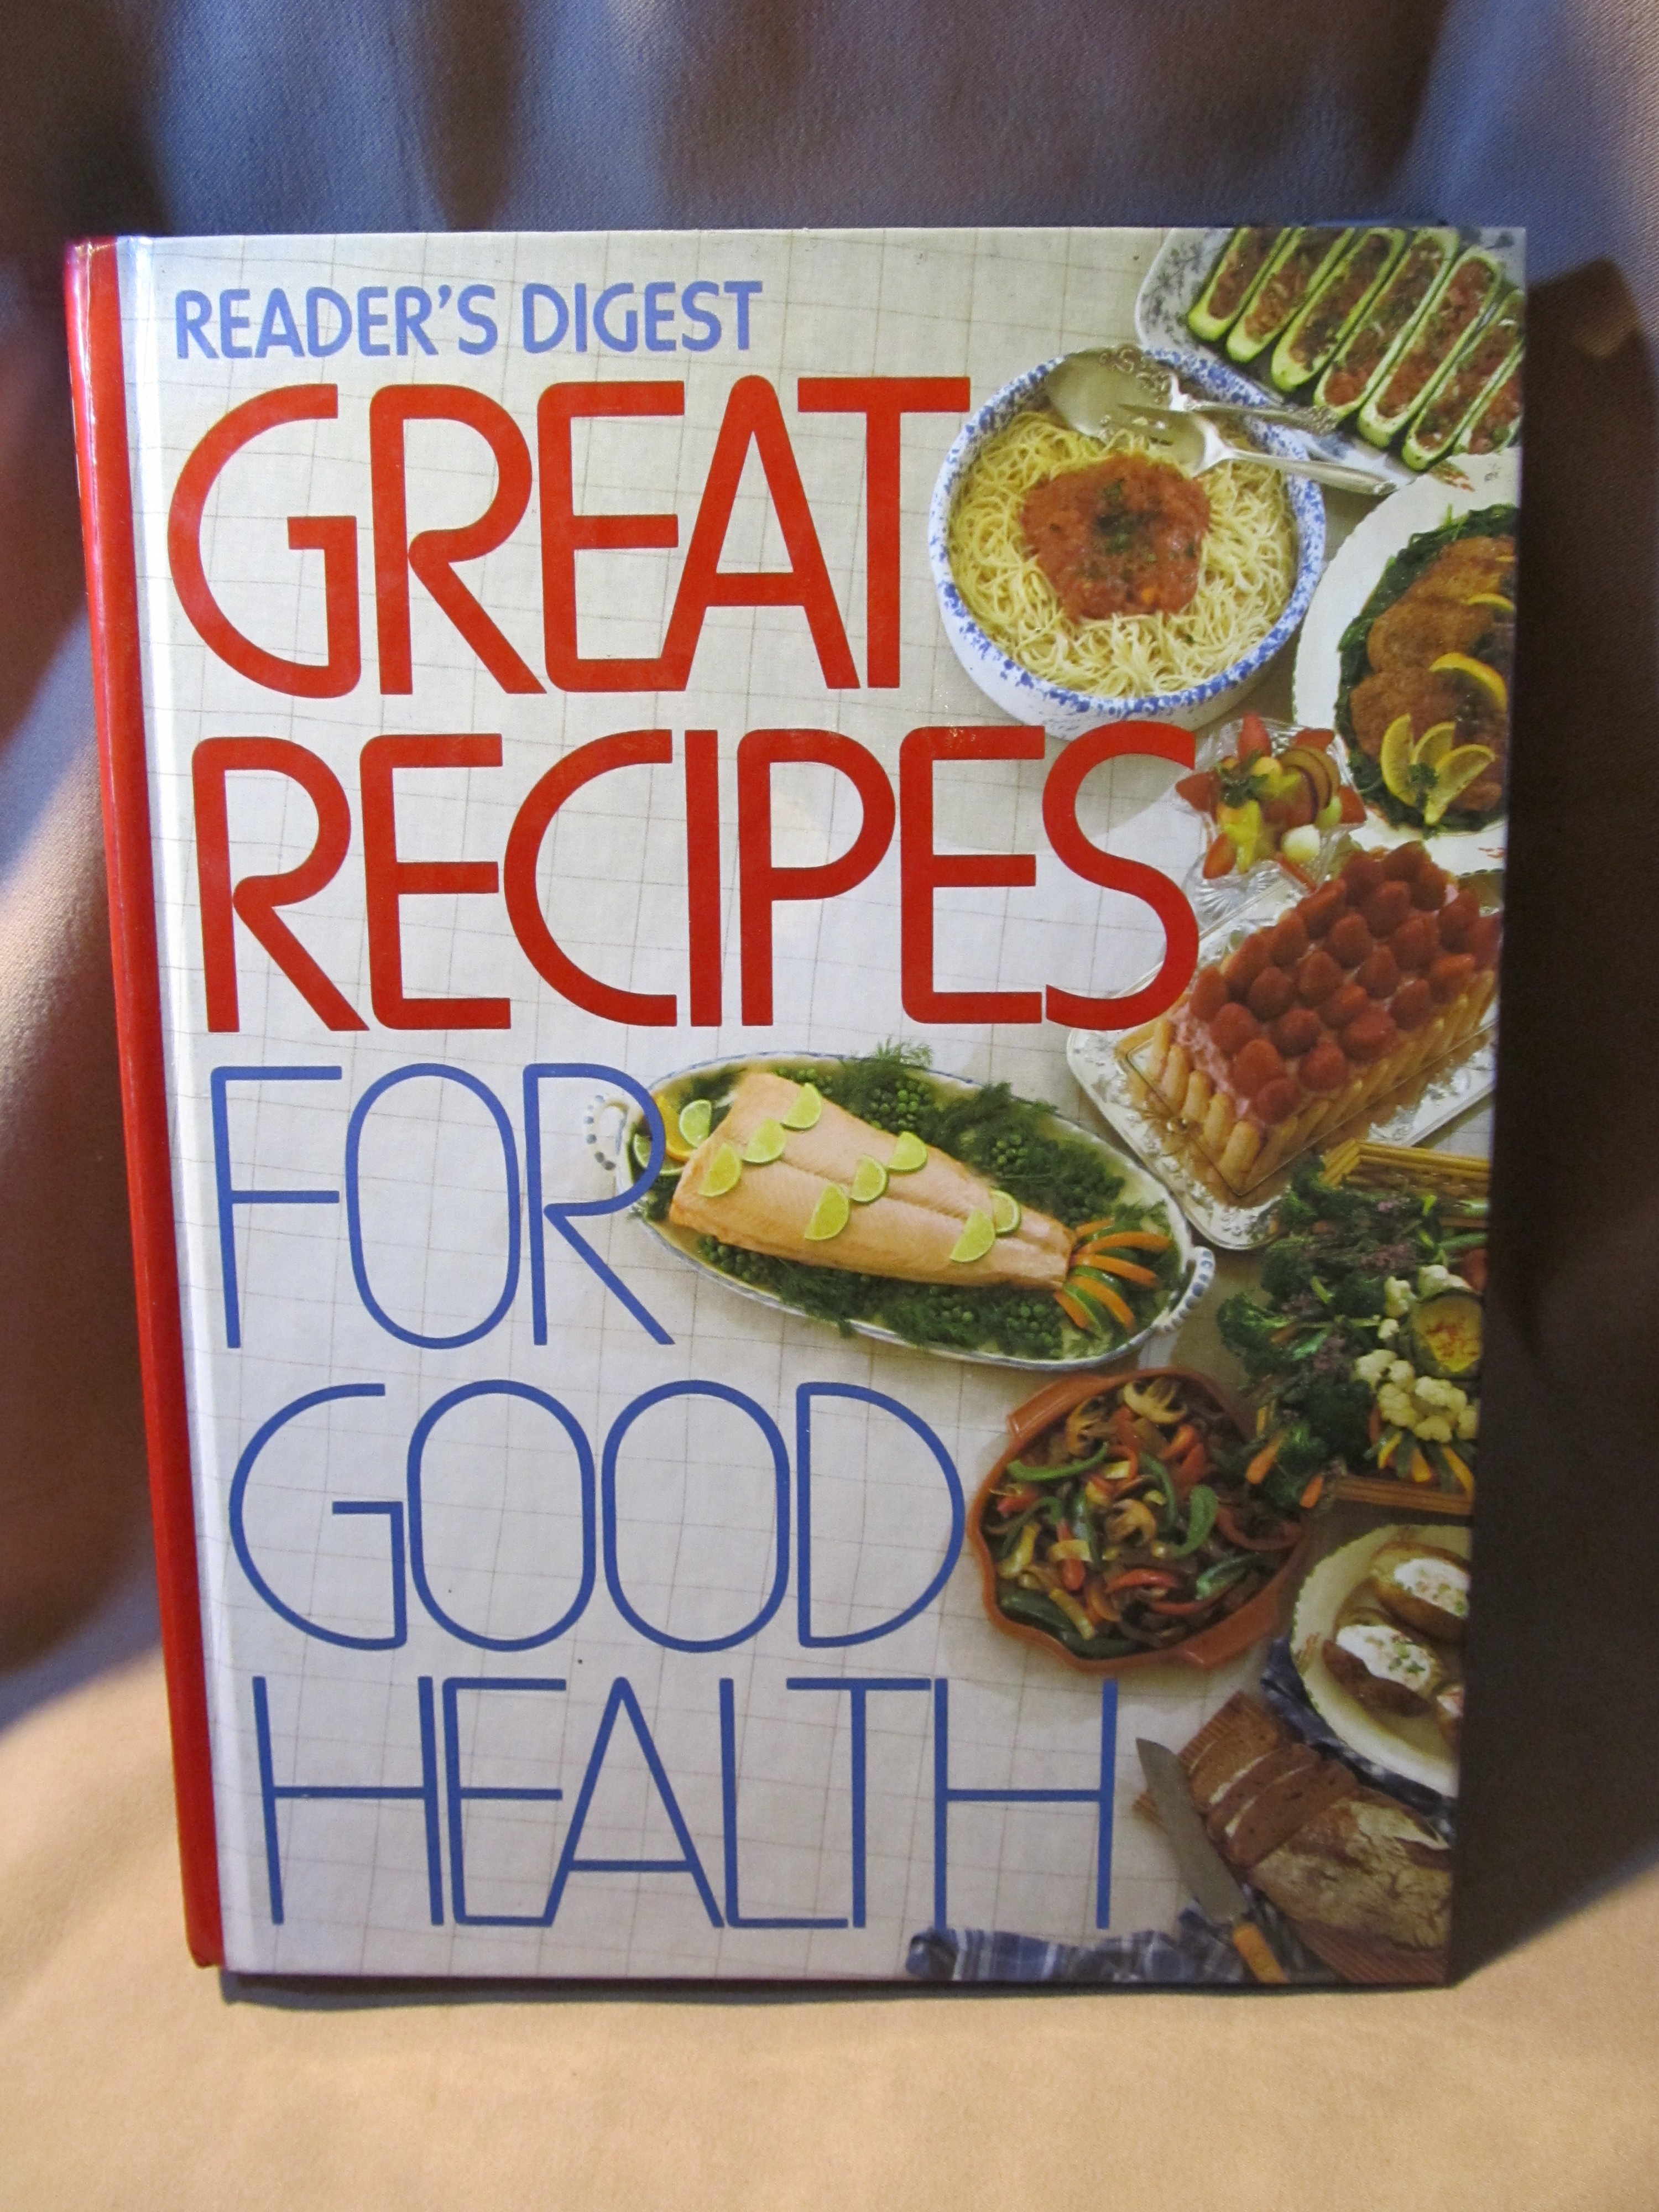 Reader's Digest Great Recipes For Good Health